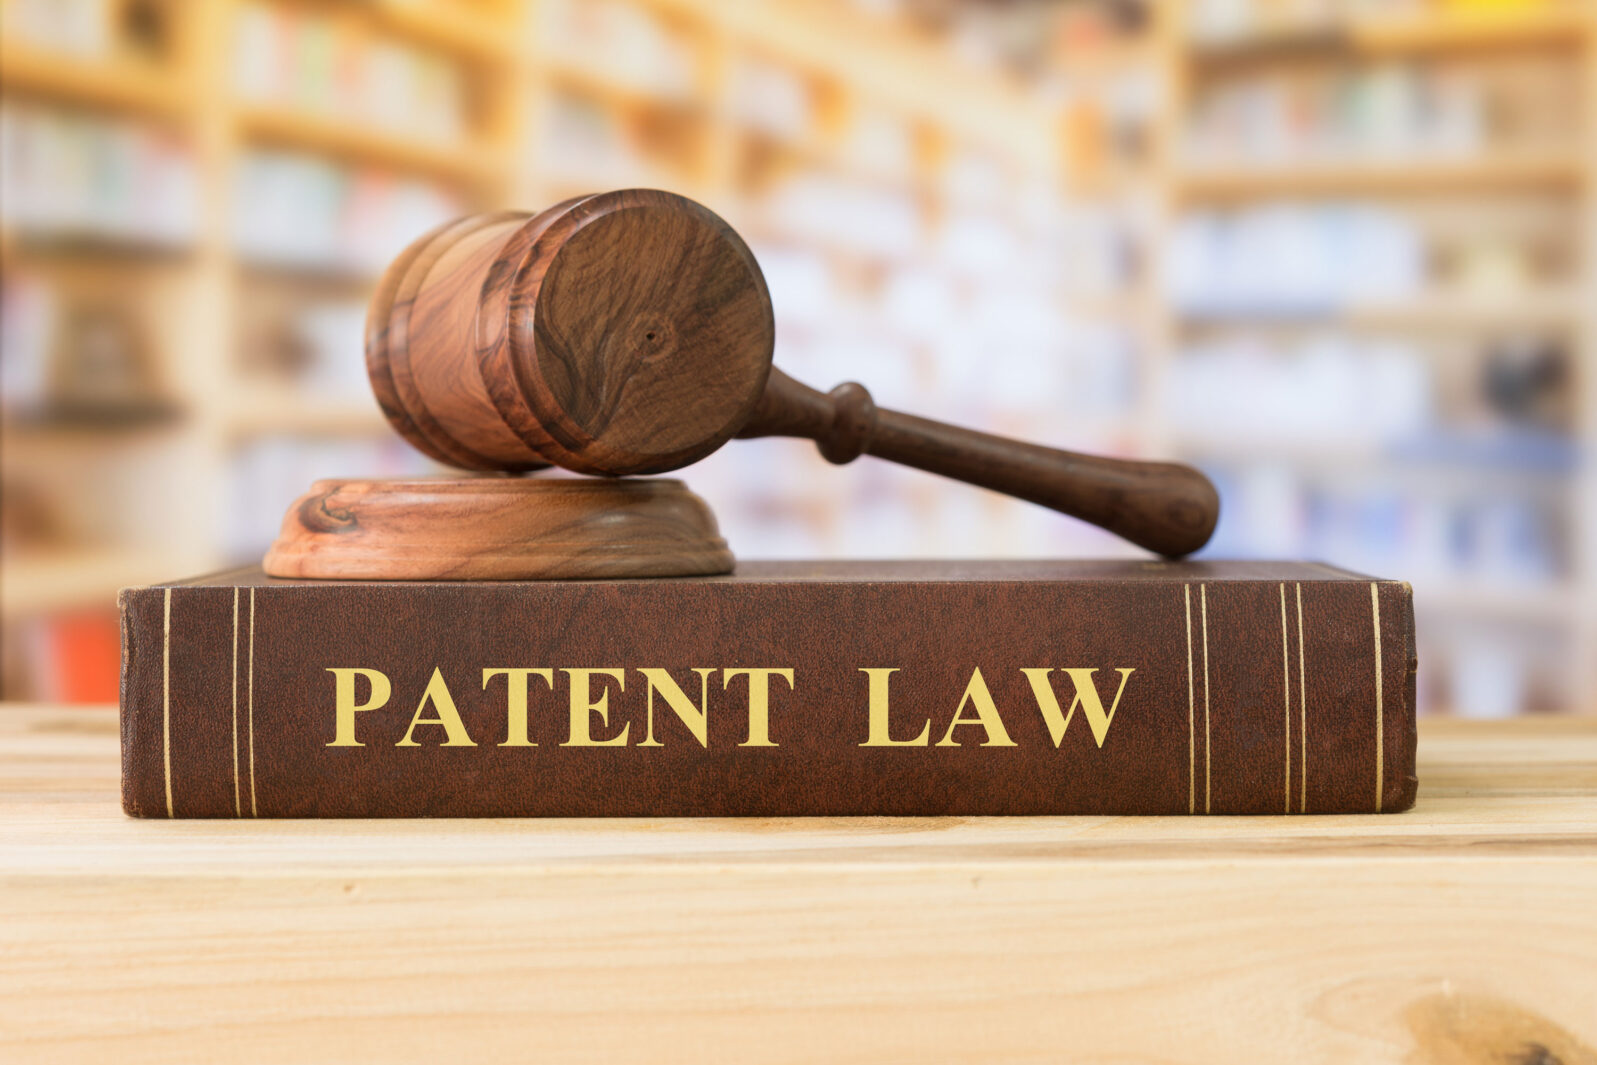 Gavel on patent law book